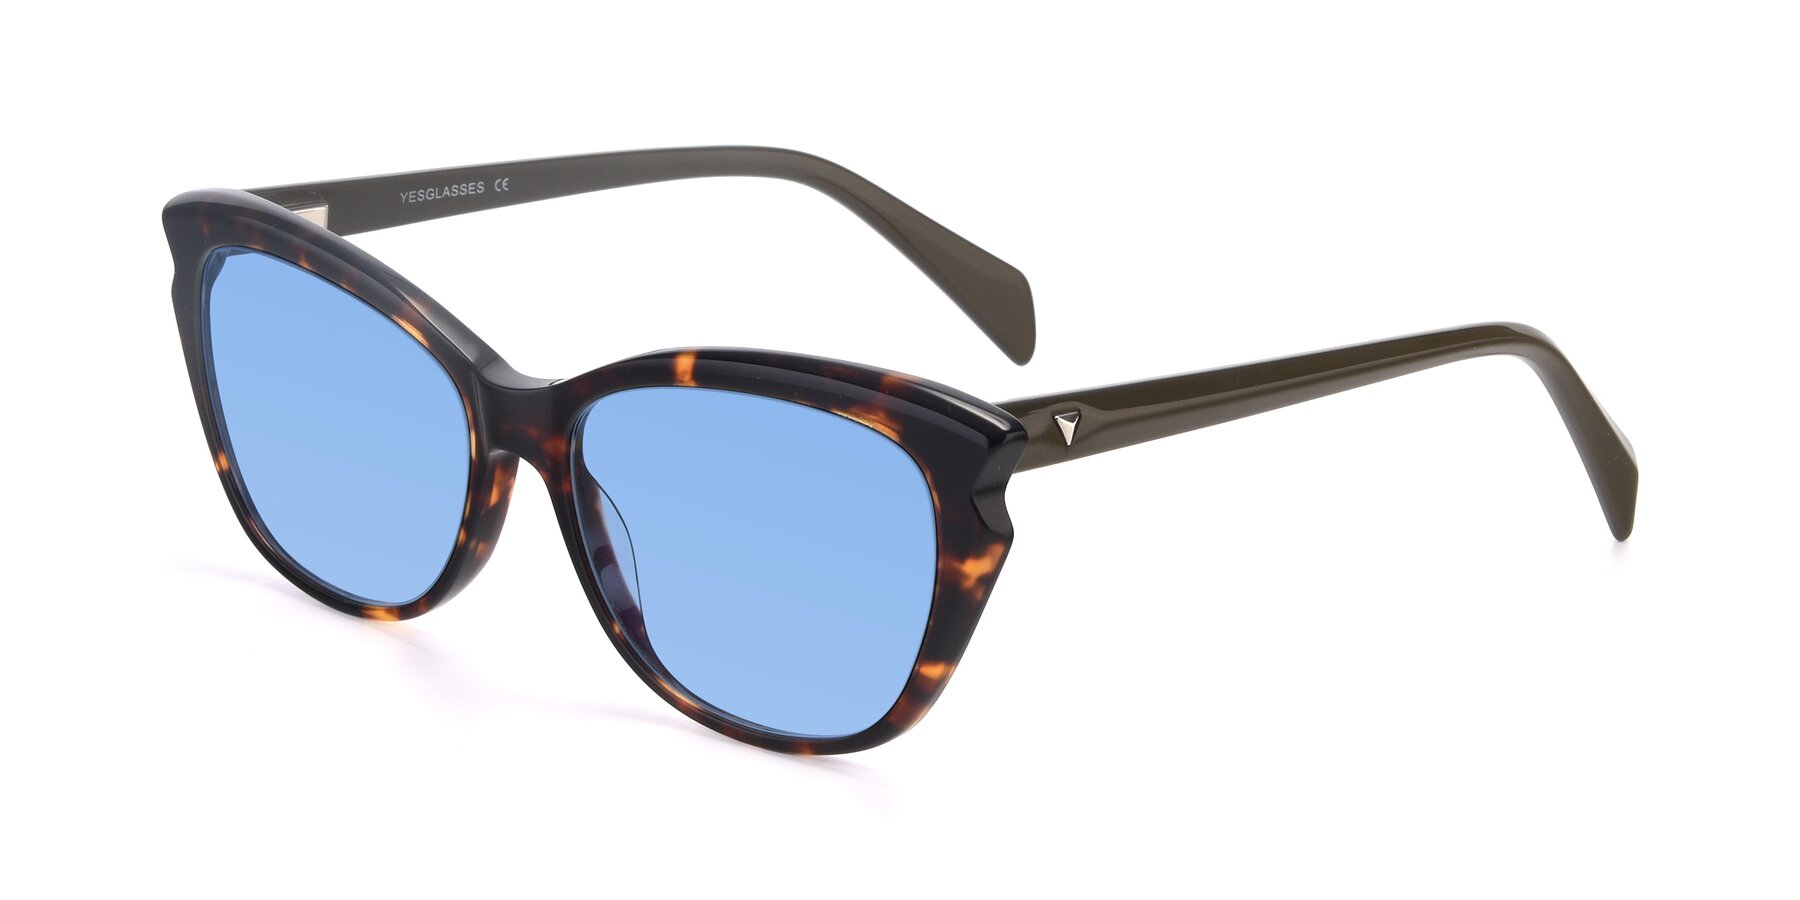 Angle of 17629 in Tortoise with Medium Blue Tinted Lenses